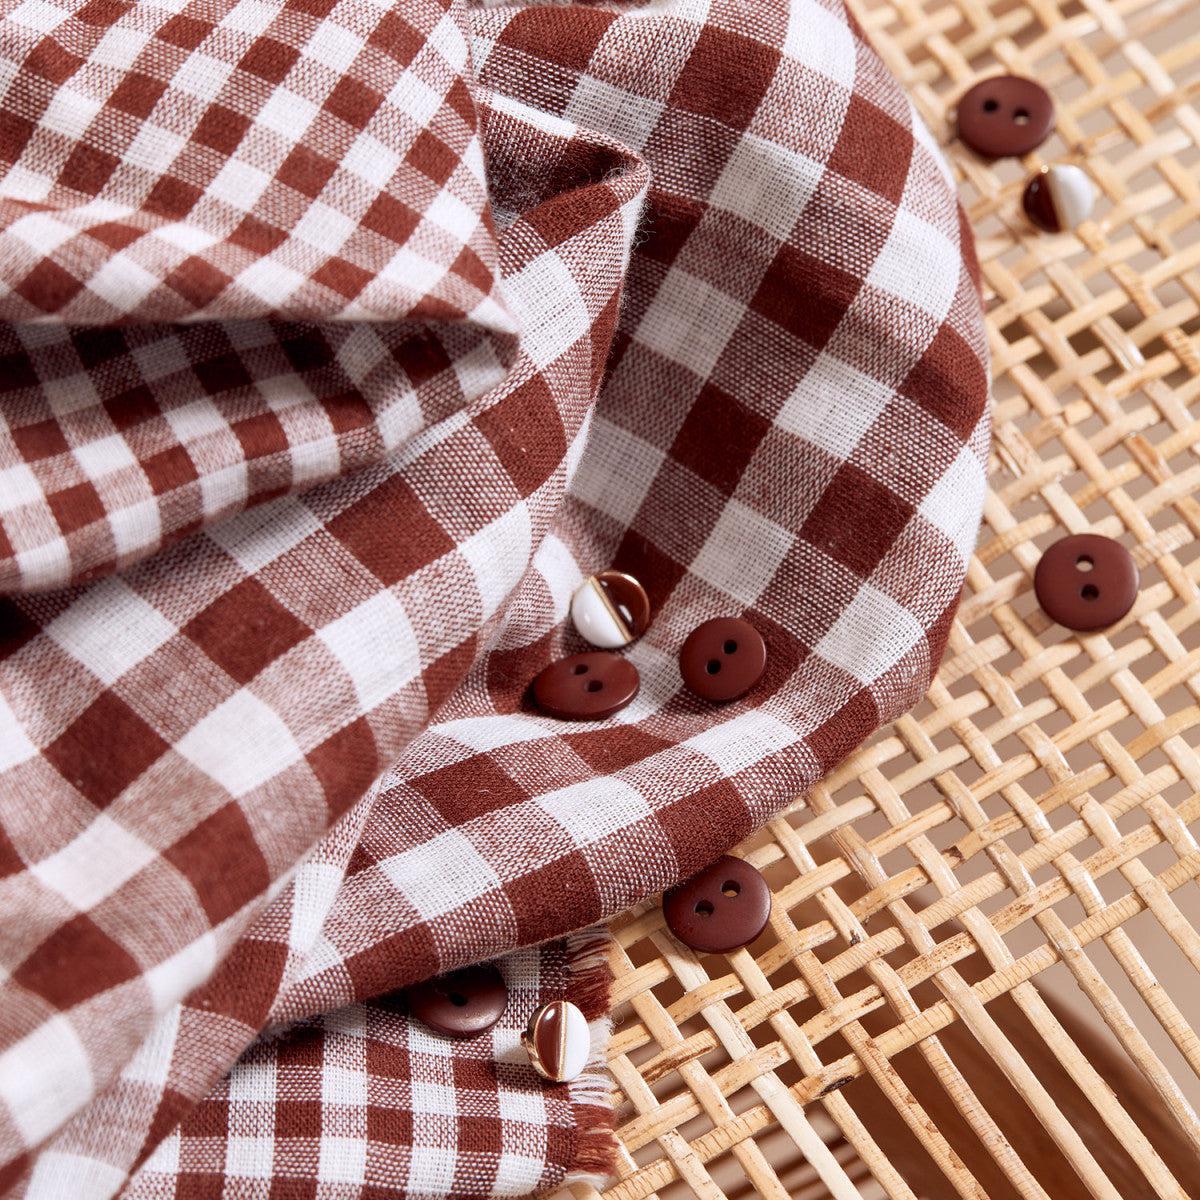 Atelier Brunette-Gingham Off-White Rust Double Gauze-fabric-gather here online